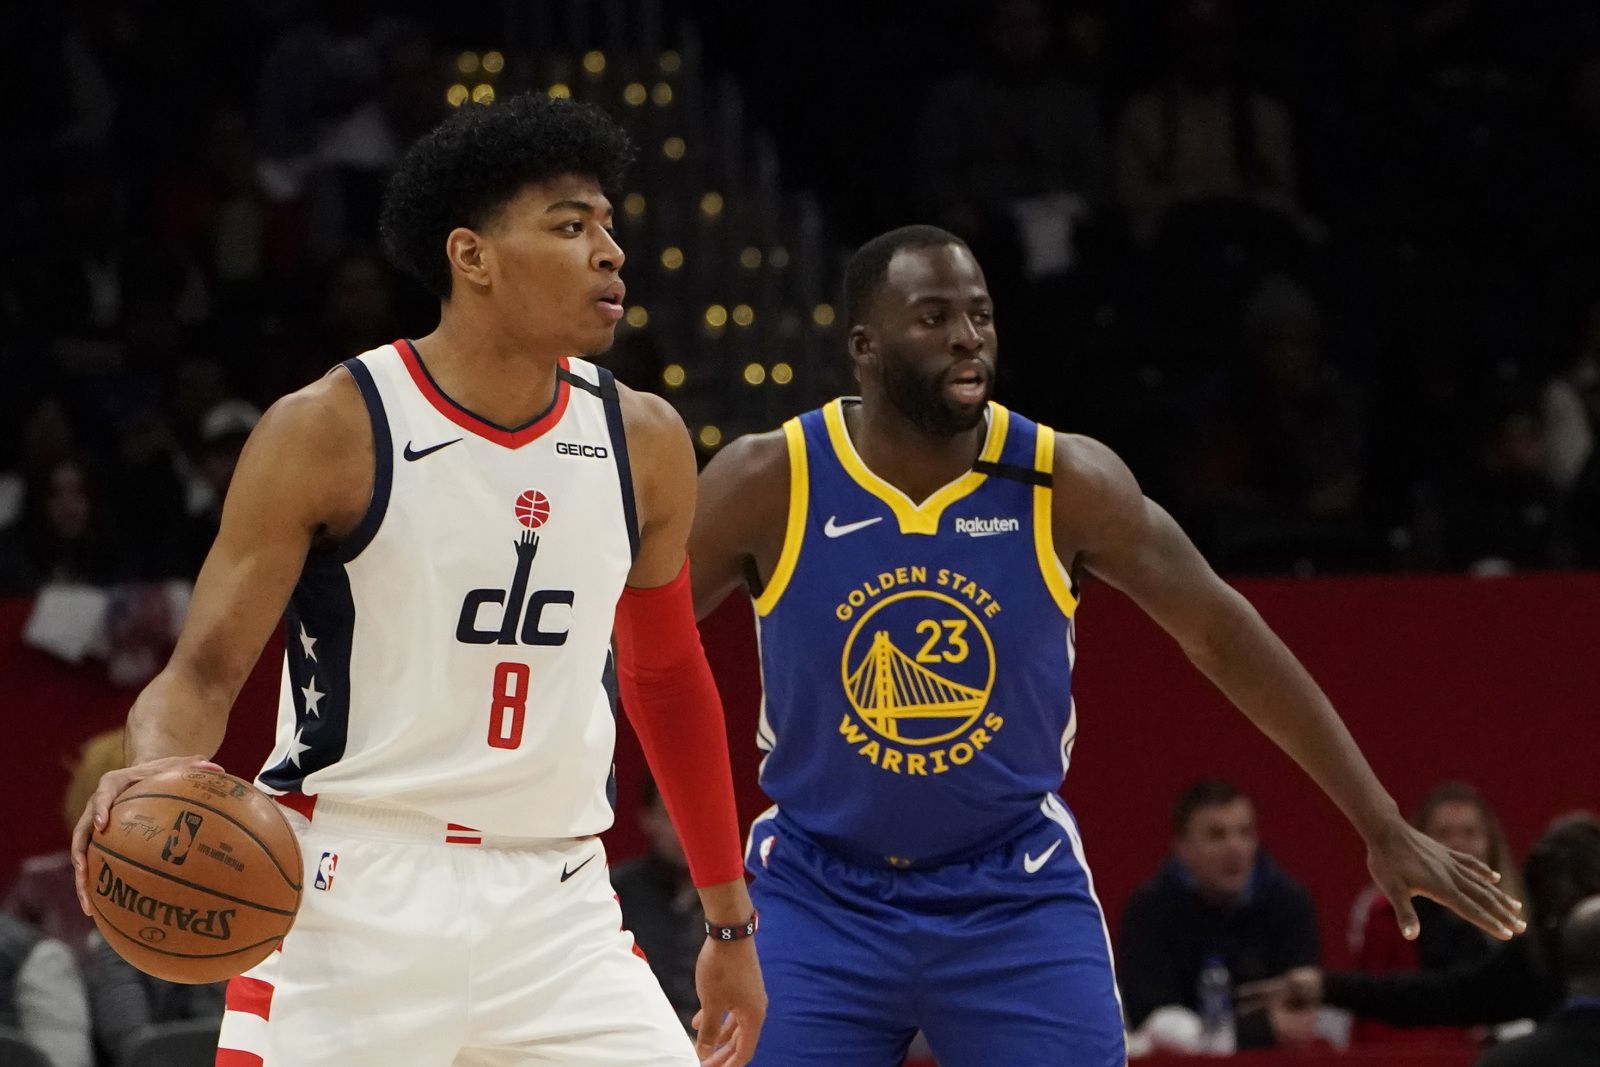 Golden State Warriors vs Washington Wizards Prediction, Betting Tips & Odds │15 MARCH, 2022